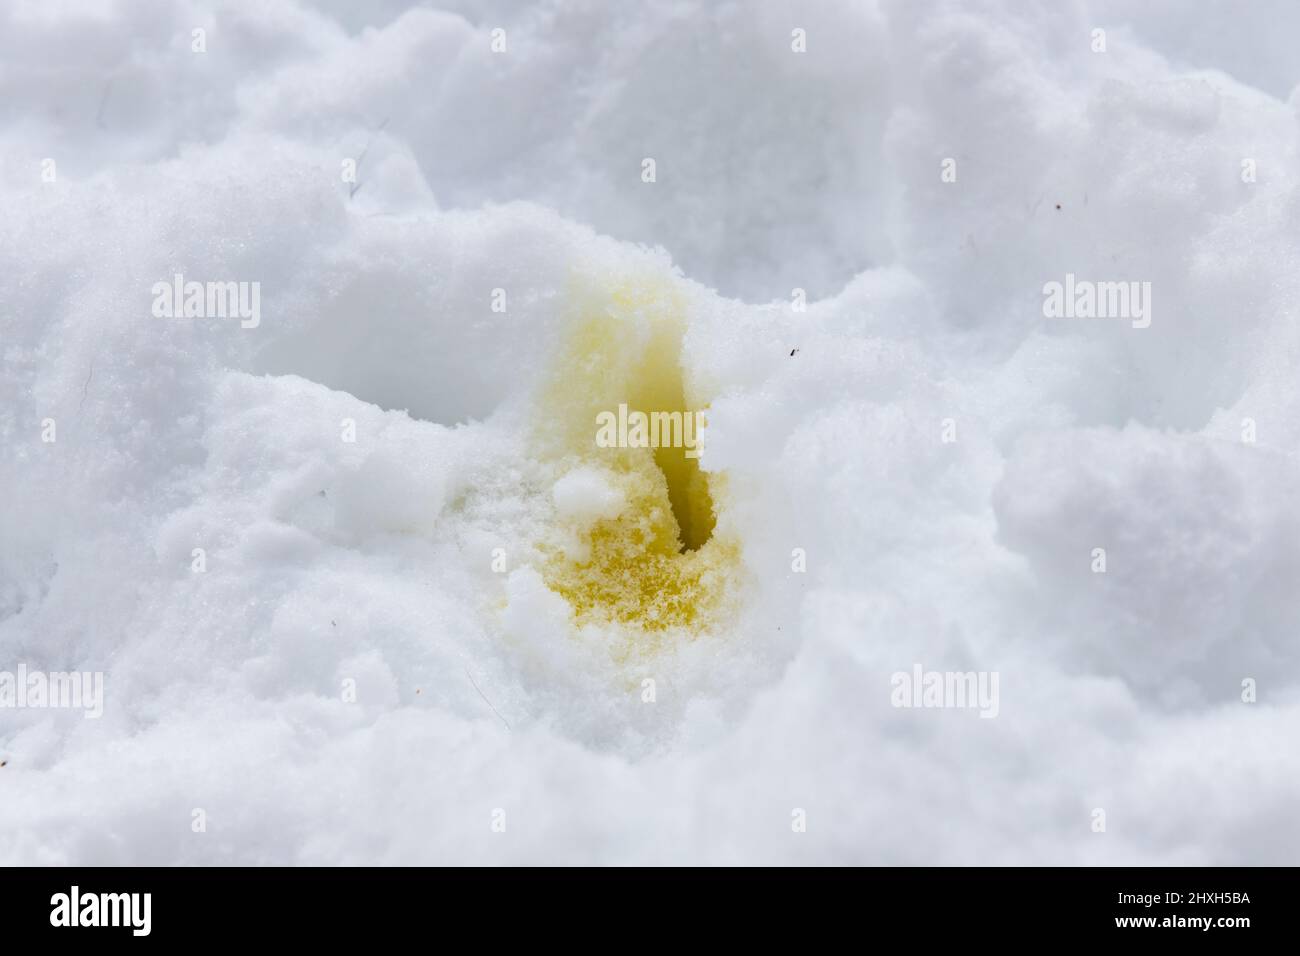 Bright yellow dog urine or pee in a white snow bank. Stock Photo